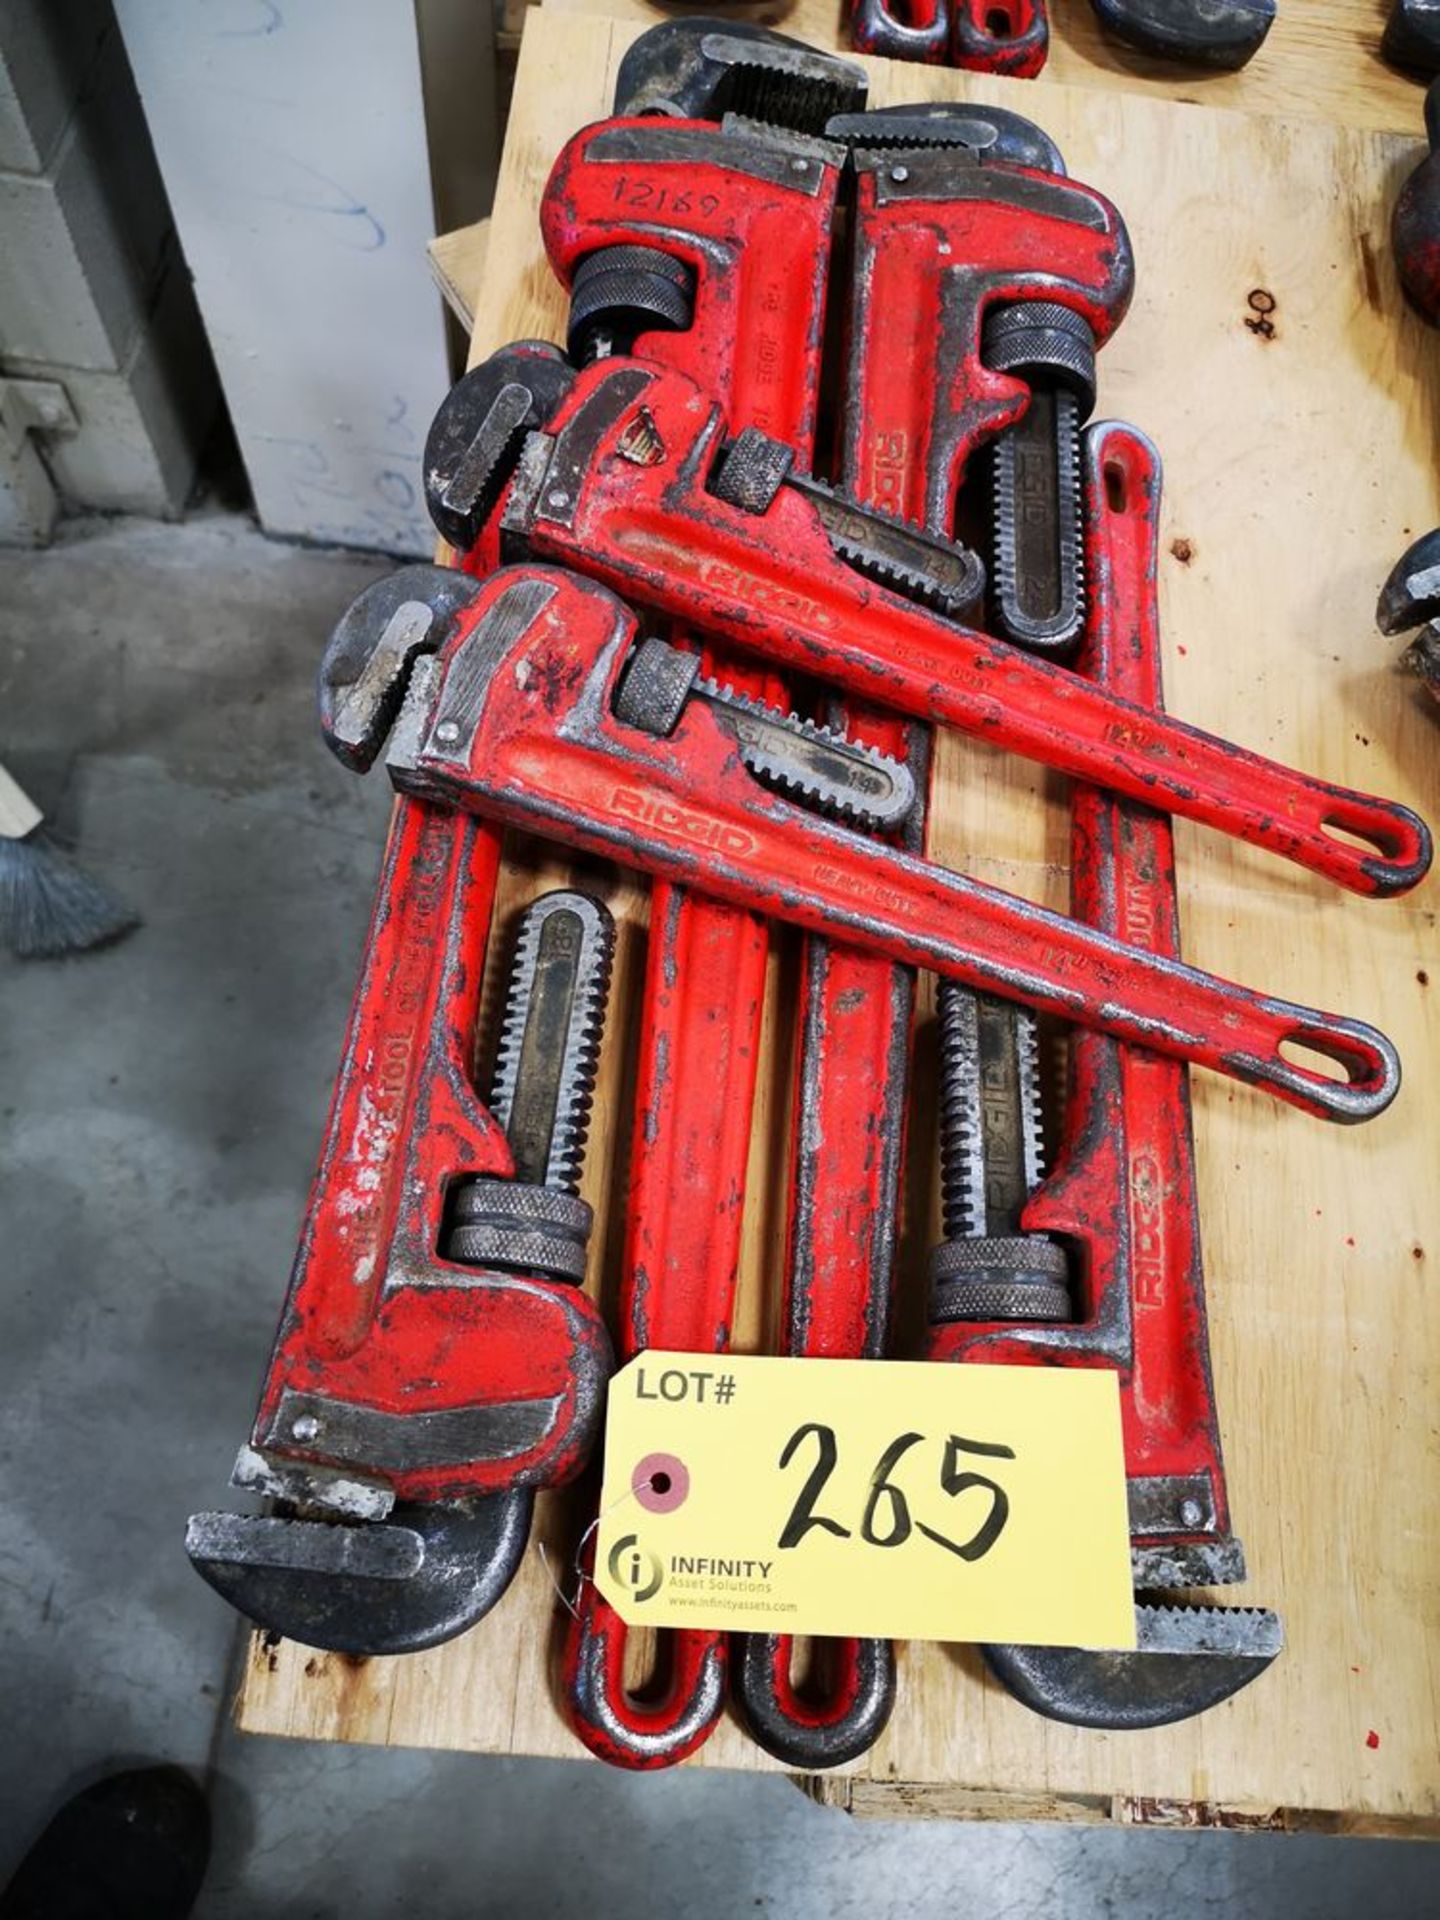 LOT RIDGID HEAVY DUTY PIPE WRENCHES, (2) 14", (2) 18", (2) 24"